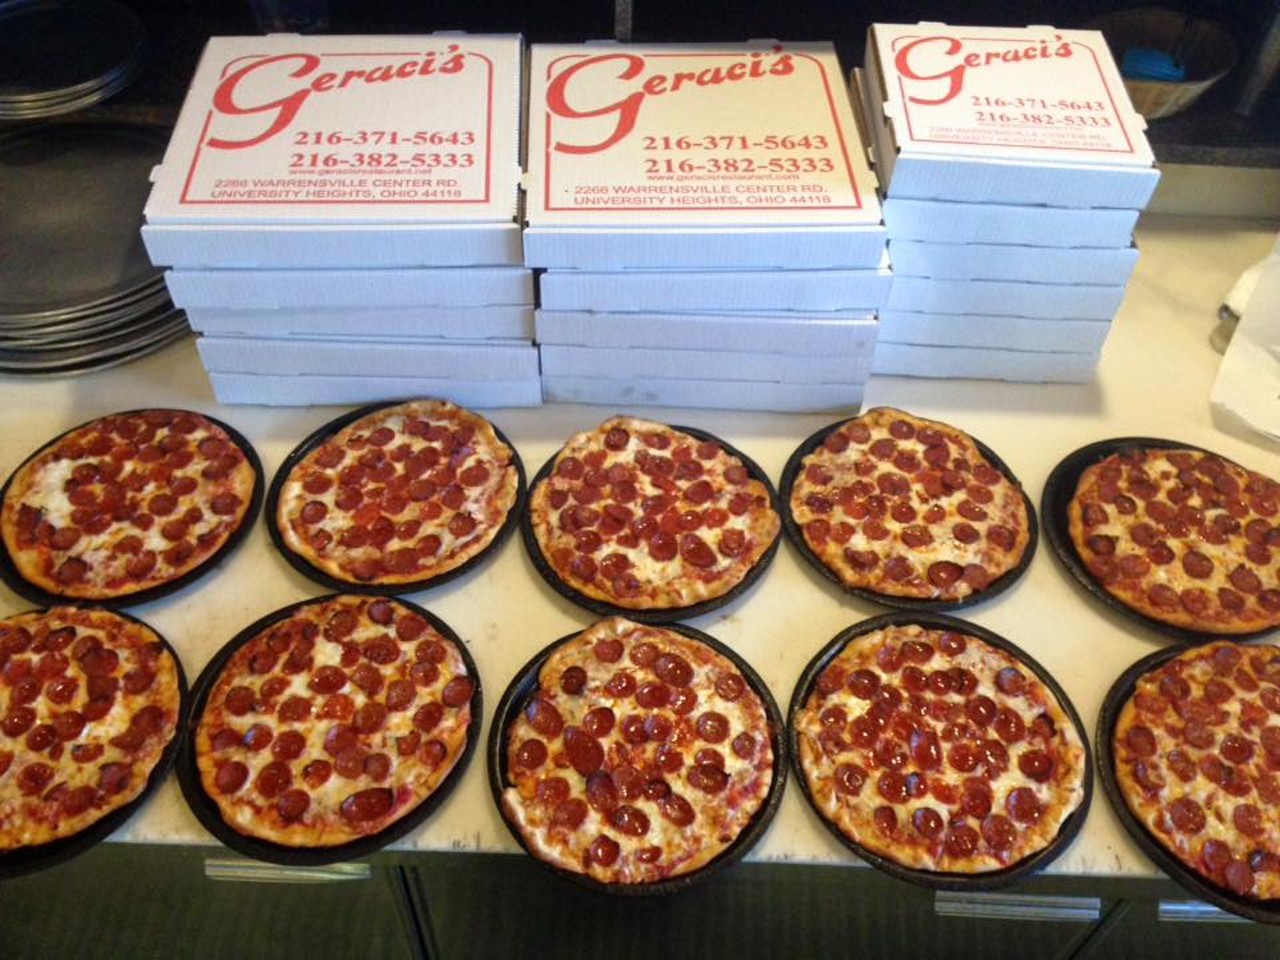  Geraci&#146;s
2266 Warrensville Center Rd., University Heights
For over 60 years, Geraci&#146;s, which has been owned by just one family throughout its storied history, has been serving up delicious pizzas to University Heights residents. This Summer, they&#146;ll expand further east to Pepper Pike, but the pizza will stay the same. The thick-cut pepperoni is the star of the show here, and the 3x2 pizza is to die for, with triple pepperoni and double sauce.
Photo via Scene Archives